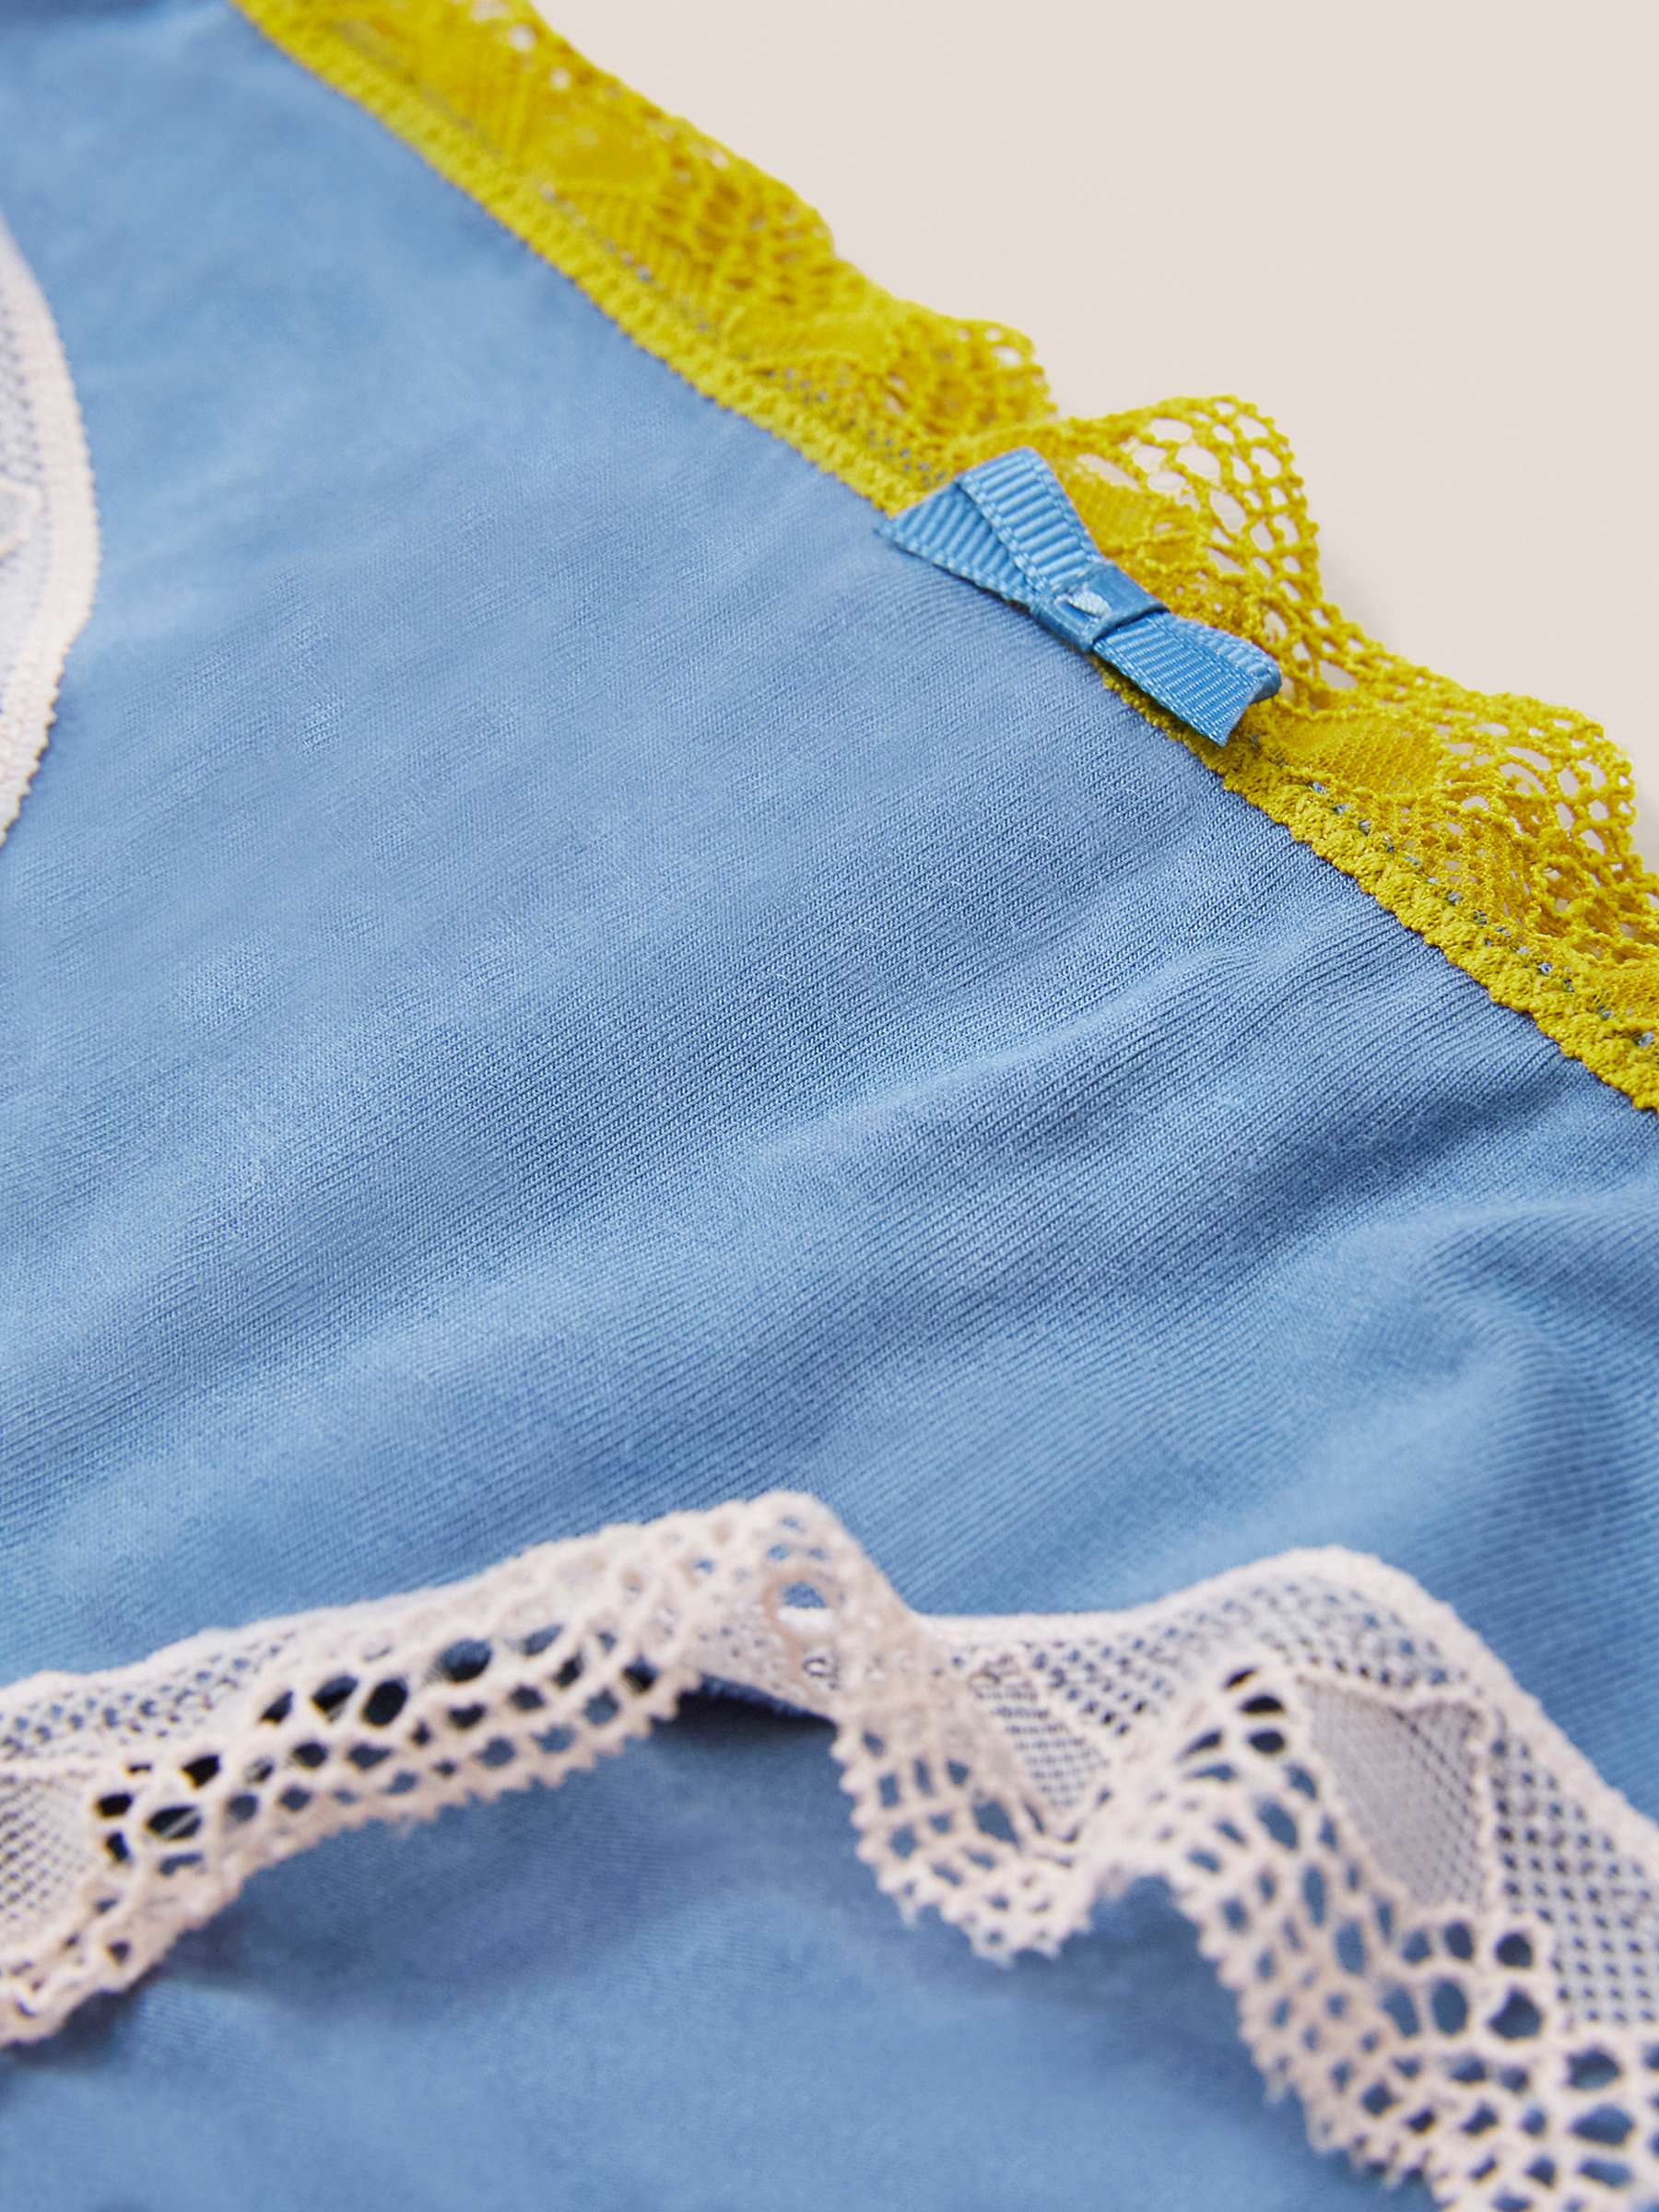 Buy White Stuff Lace Detailing Knickers, Blue/Multi Online at johnlewis.com